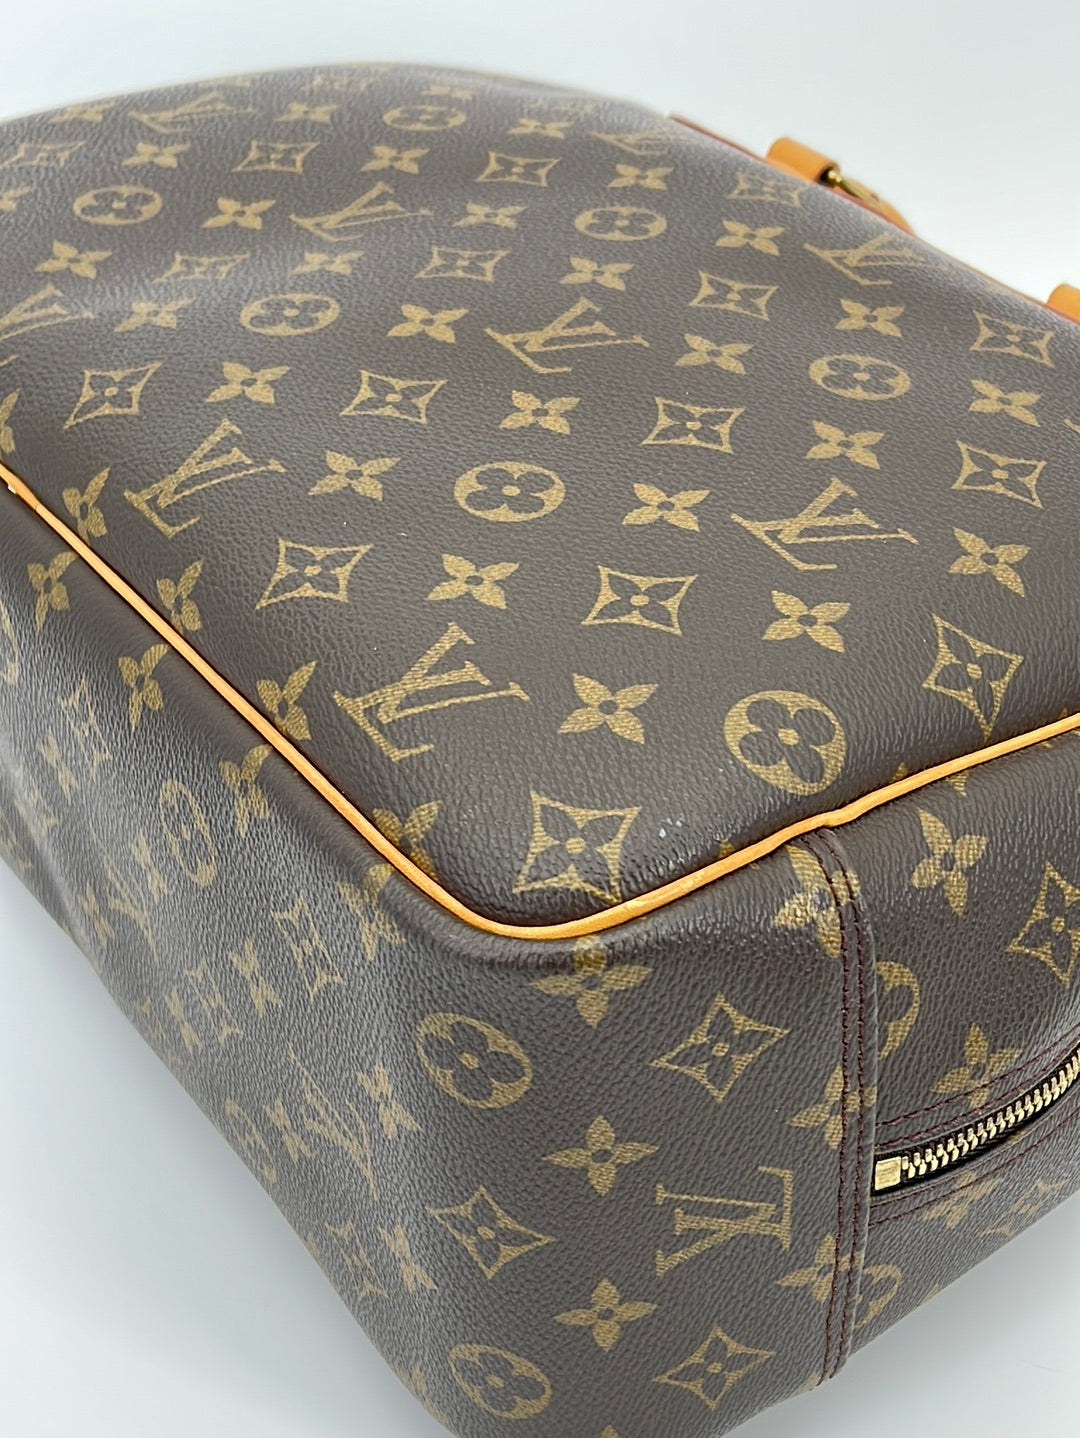 Shop for Louis Vuitton Monogram Canvas Leather Deauville Doctor Bag -  Shipped from USA